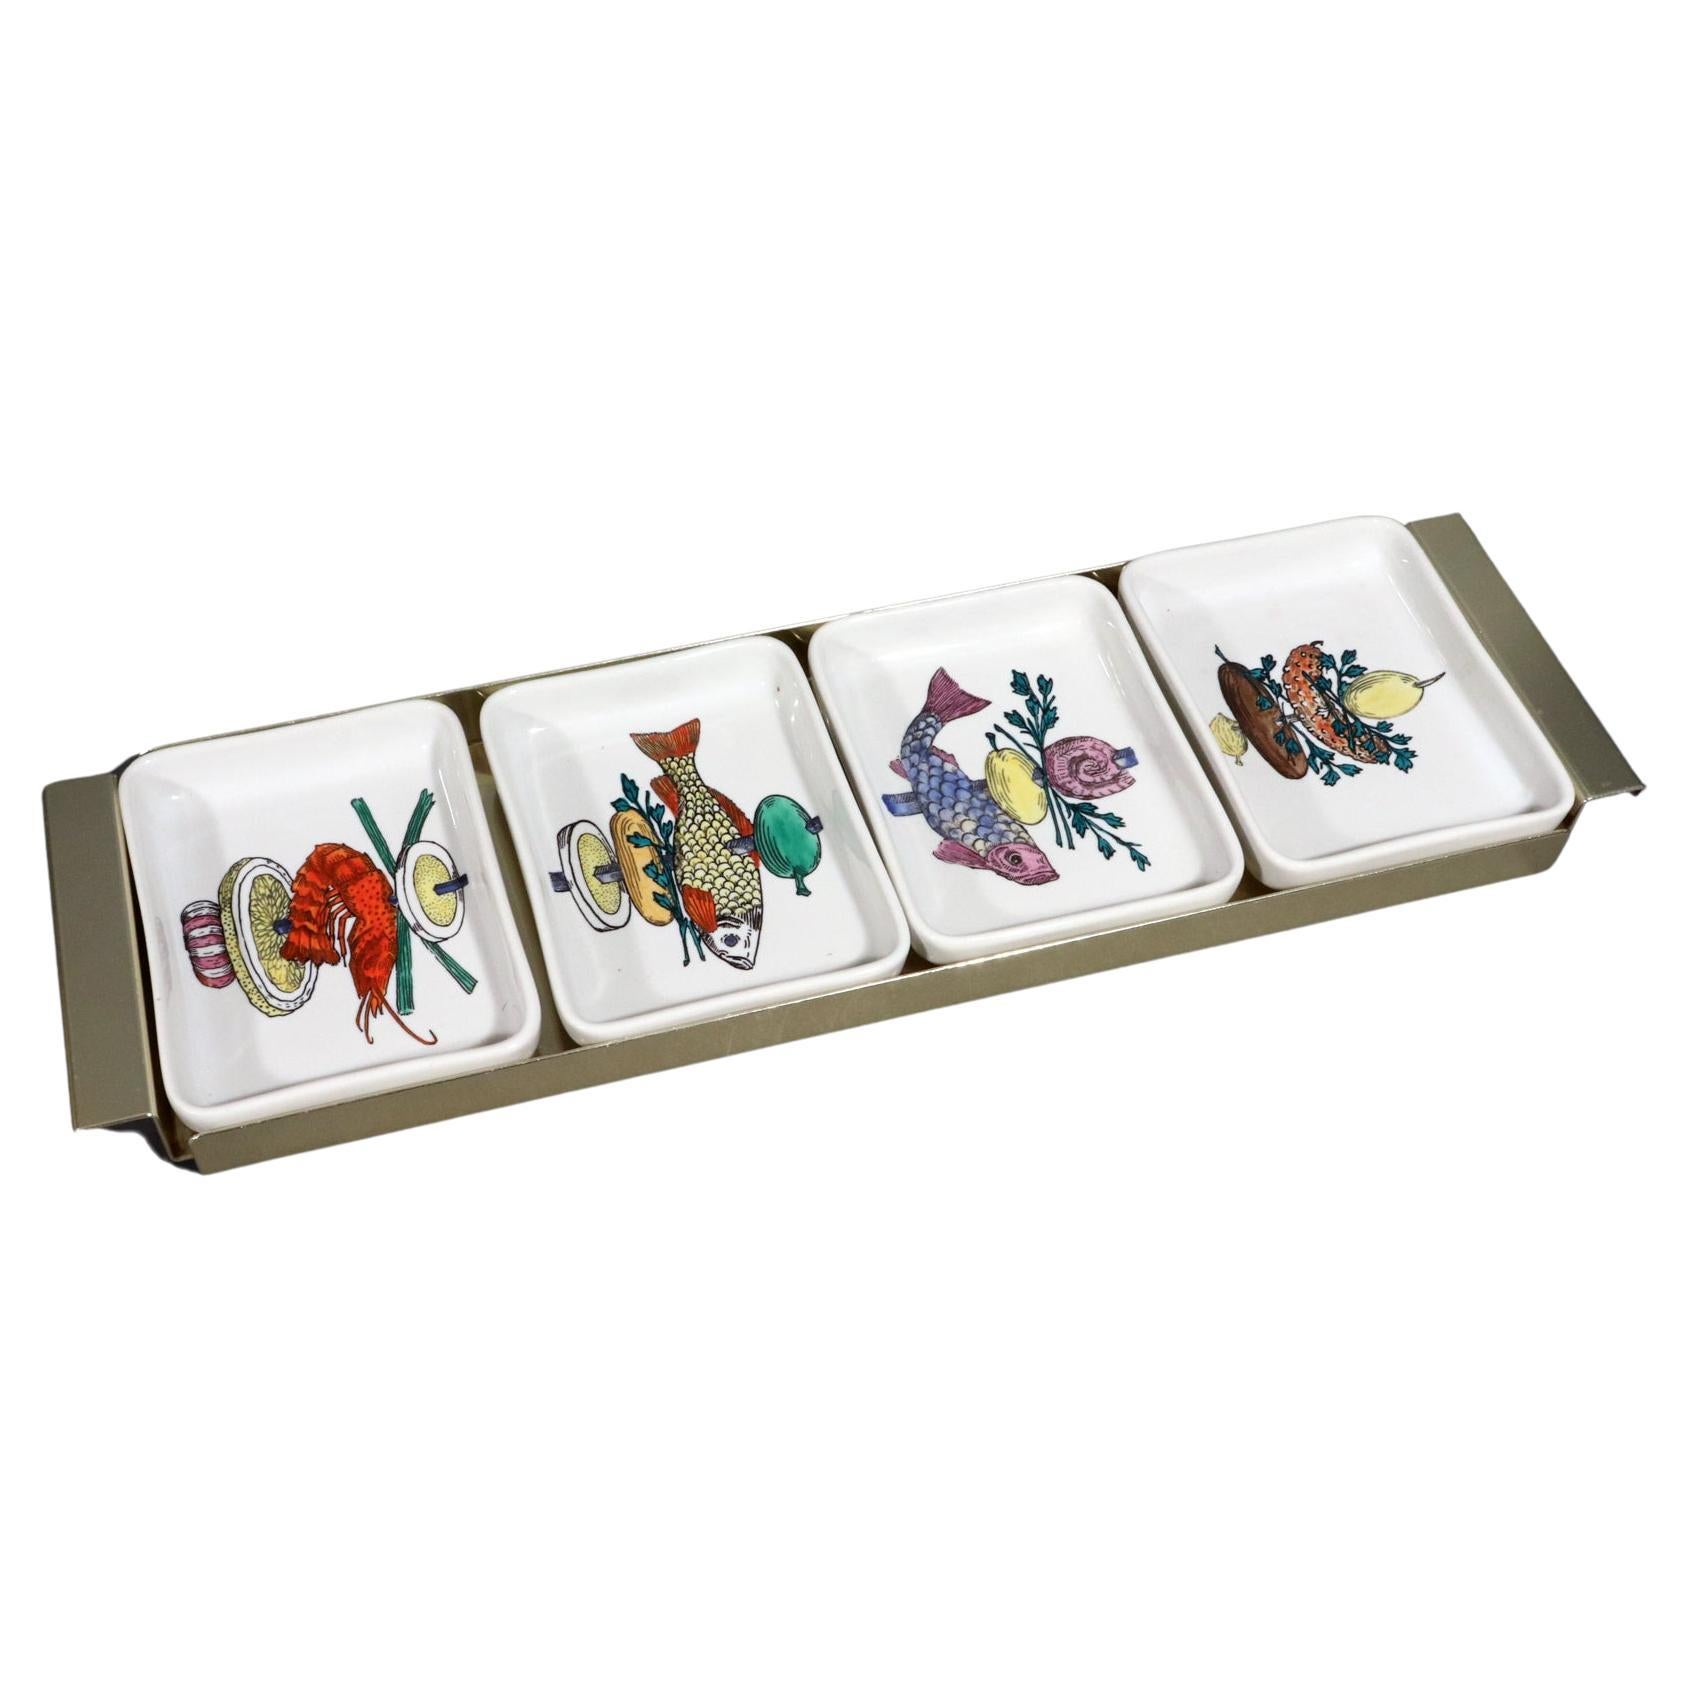 Mid-century Modern Piero Fornasetti Ceramic Appetizer Fish Kebab Dishes and Tray For Sale